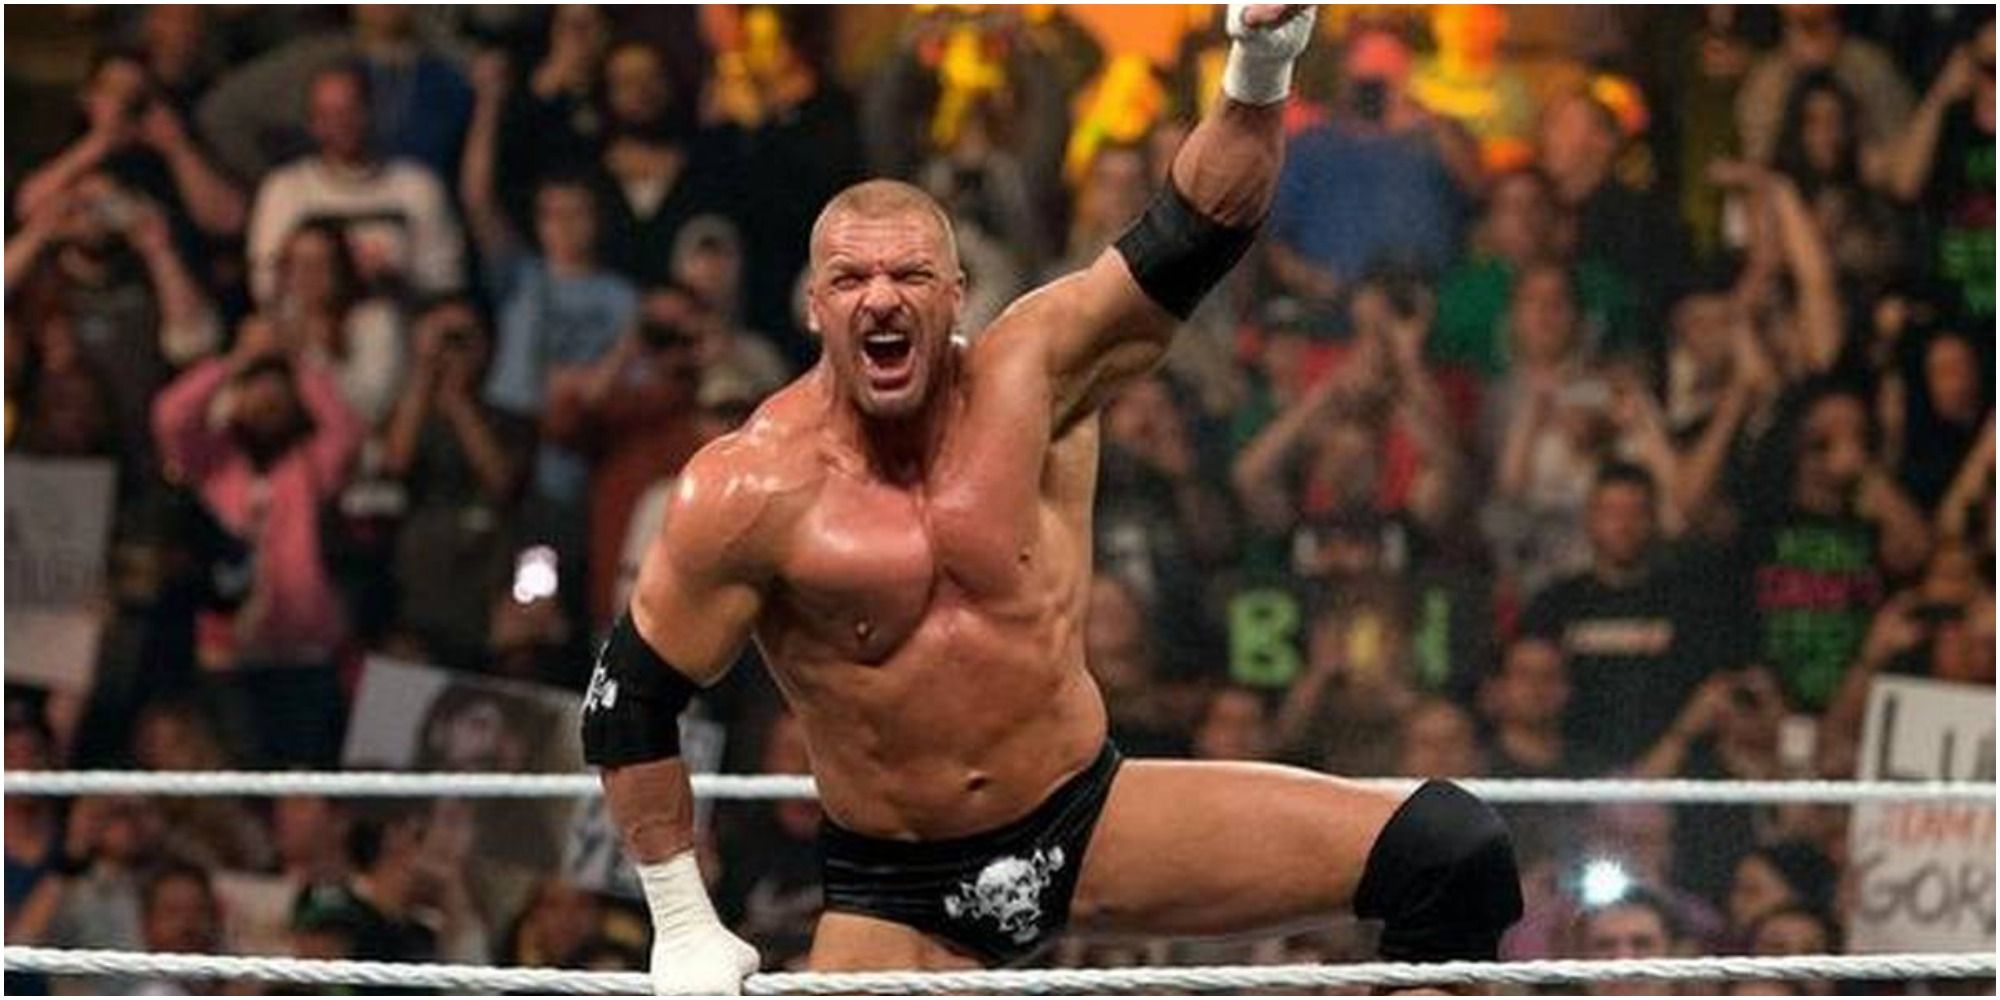 WWE Triple H in the ring